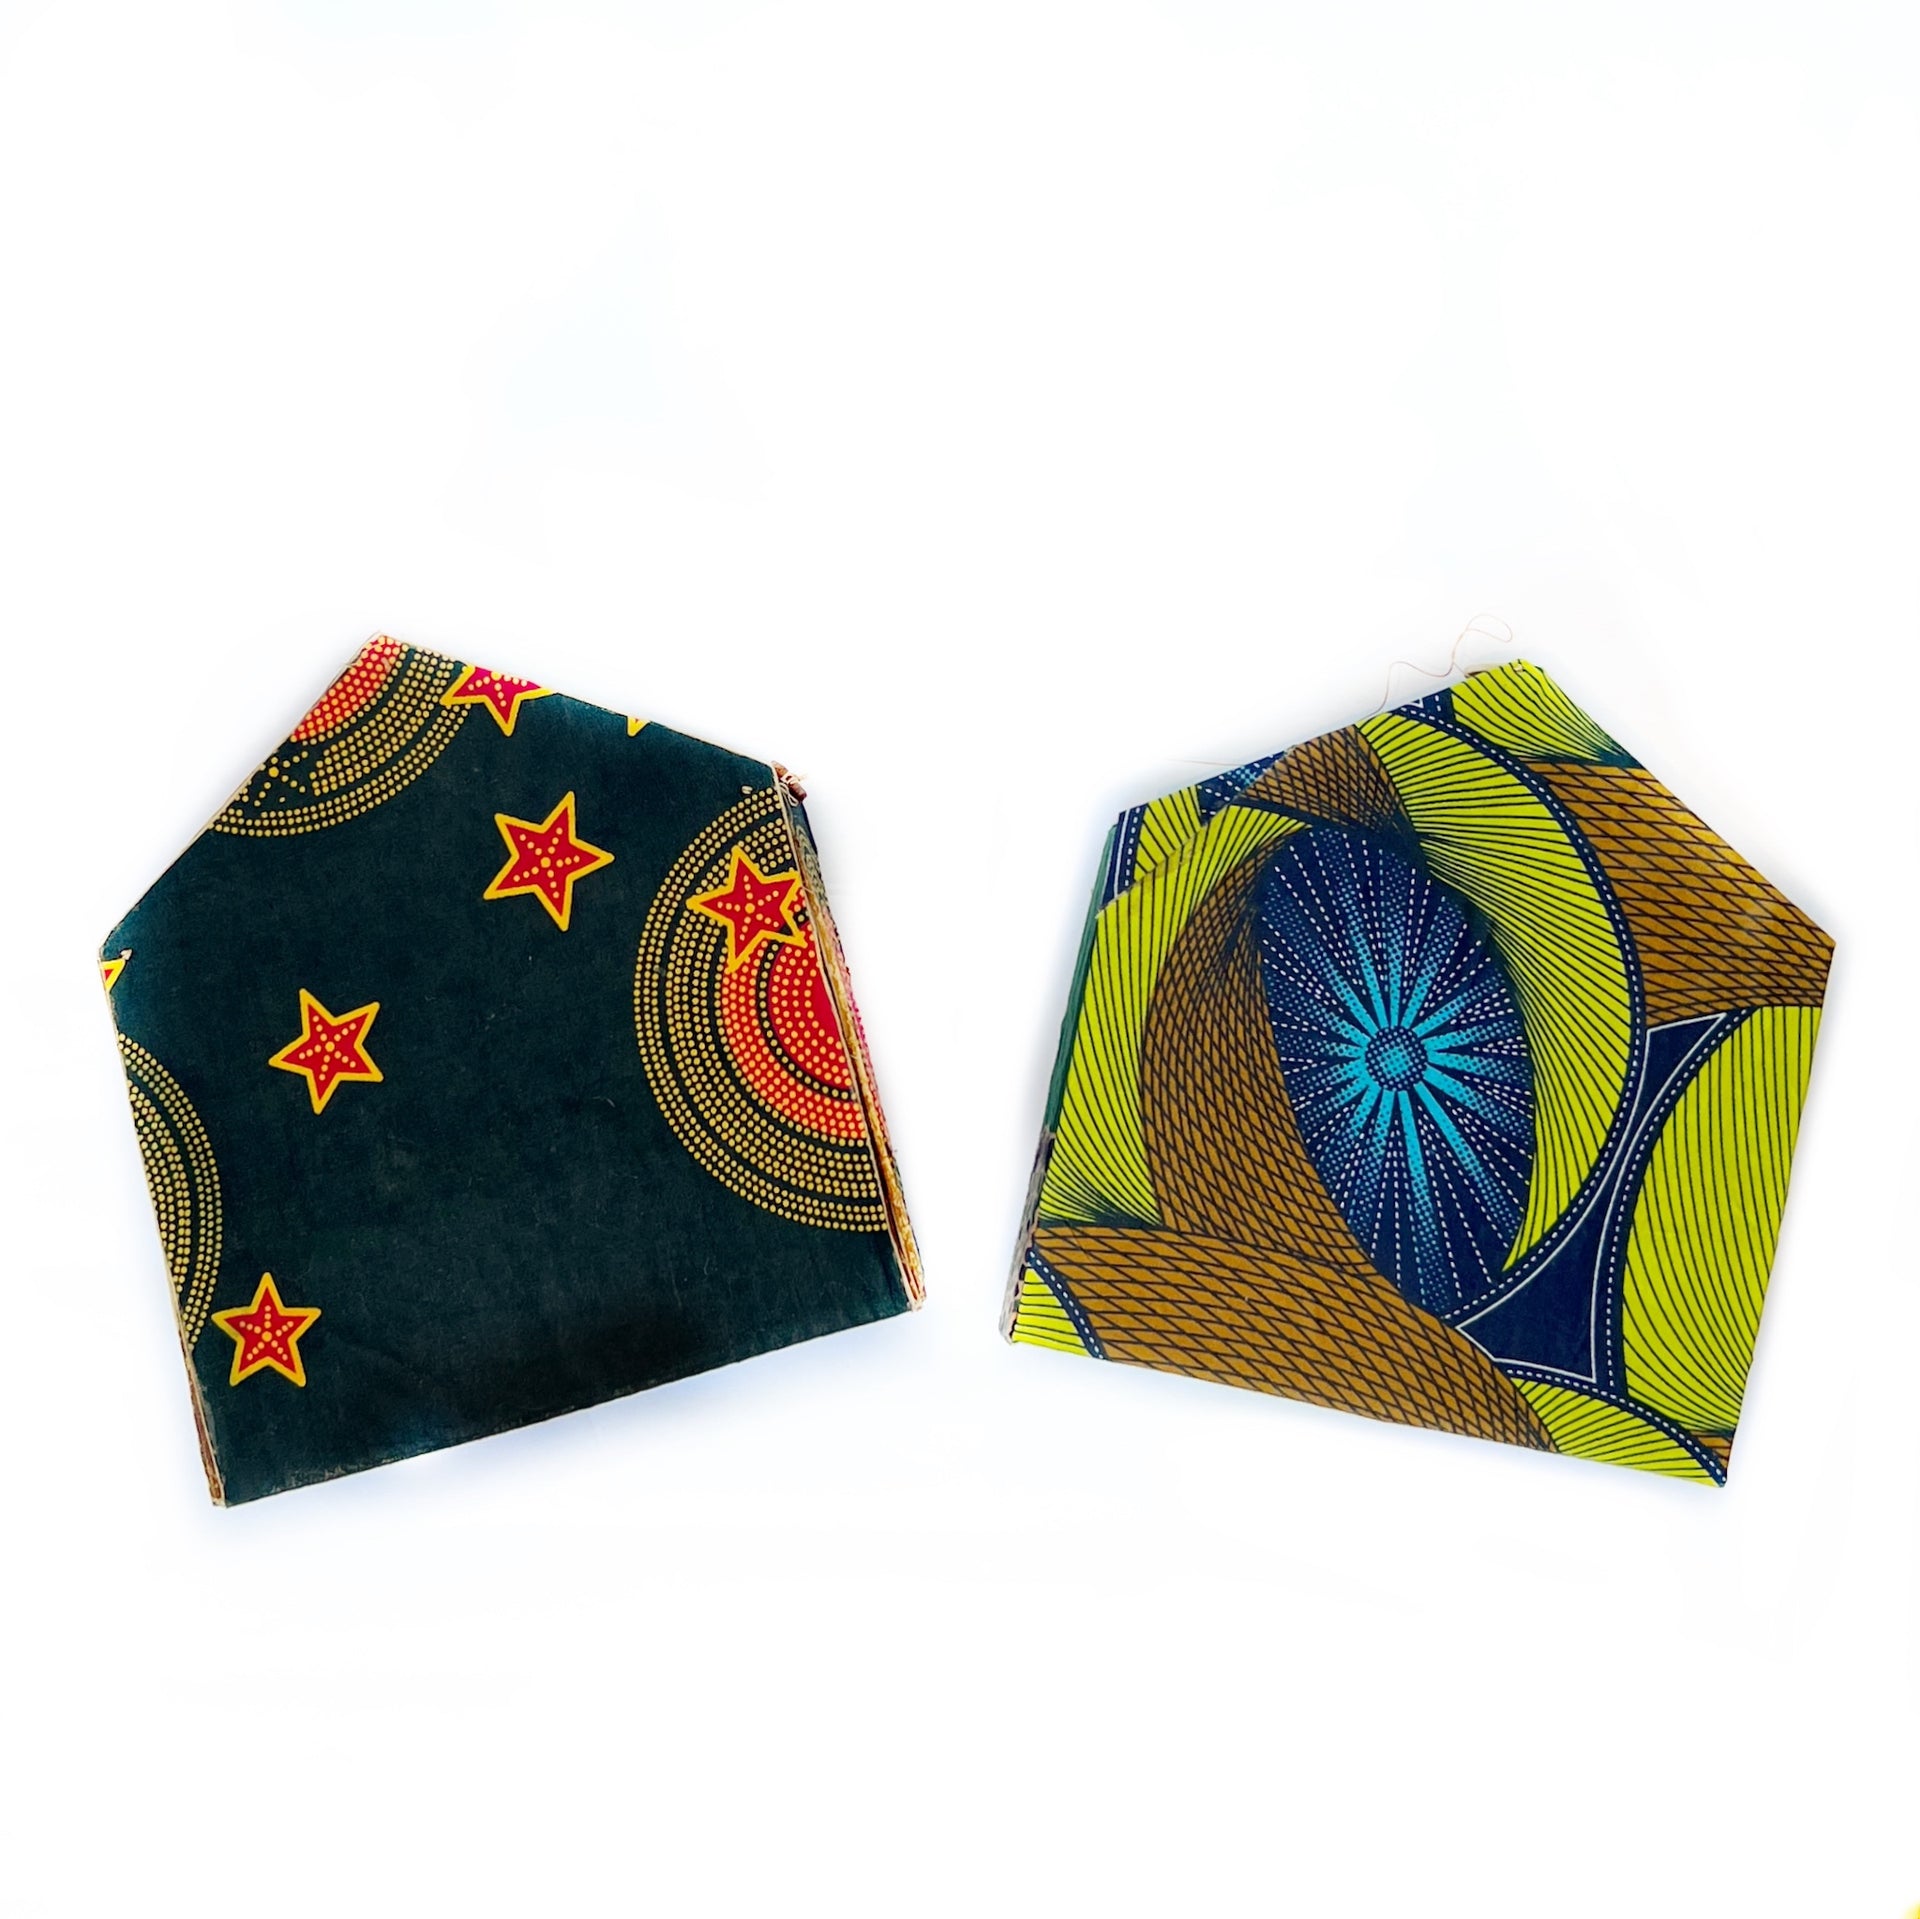 Fabric variations in box of African nativity set